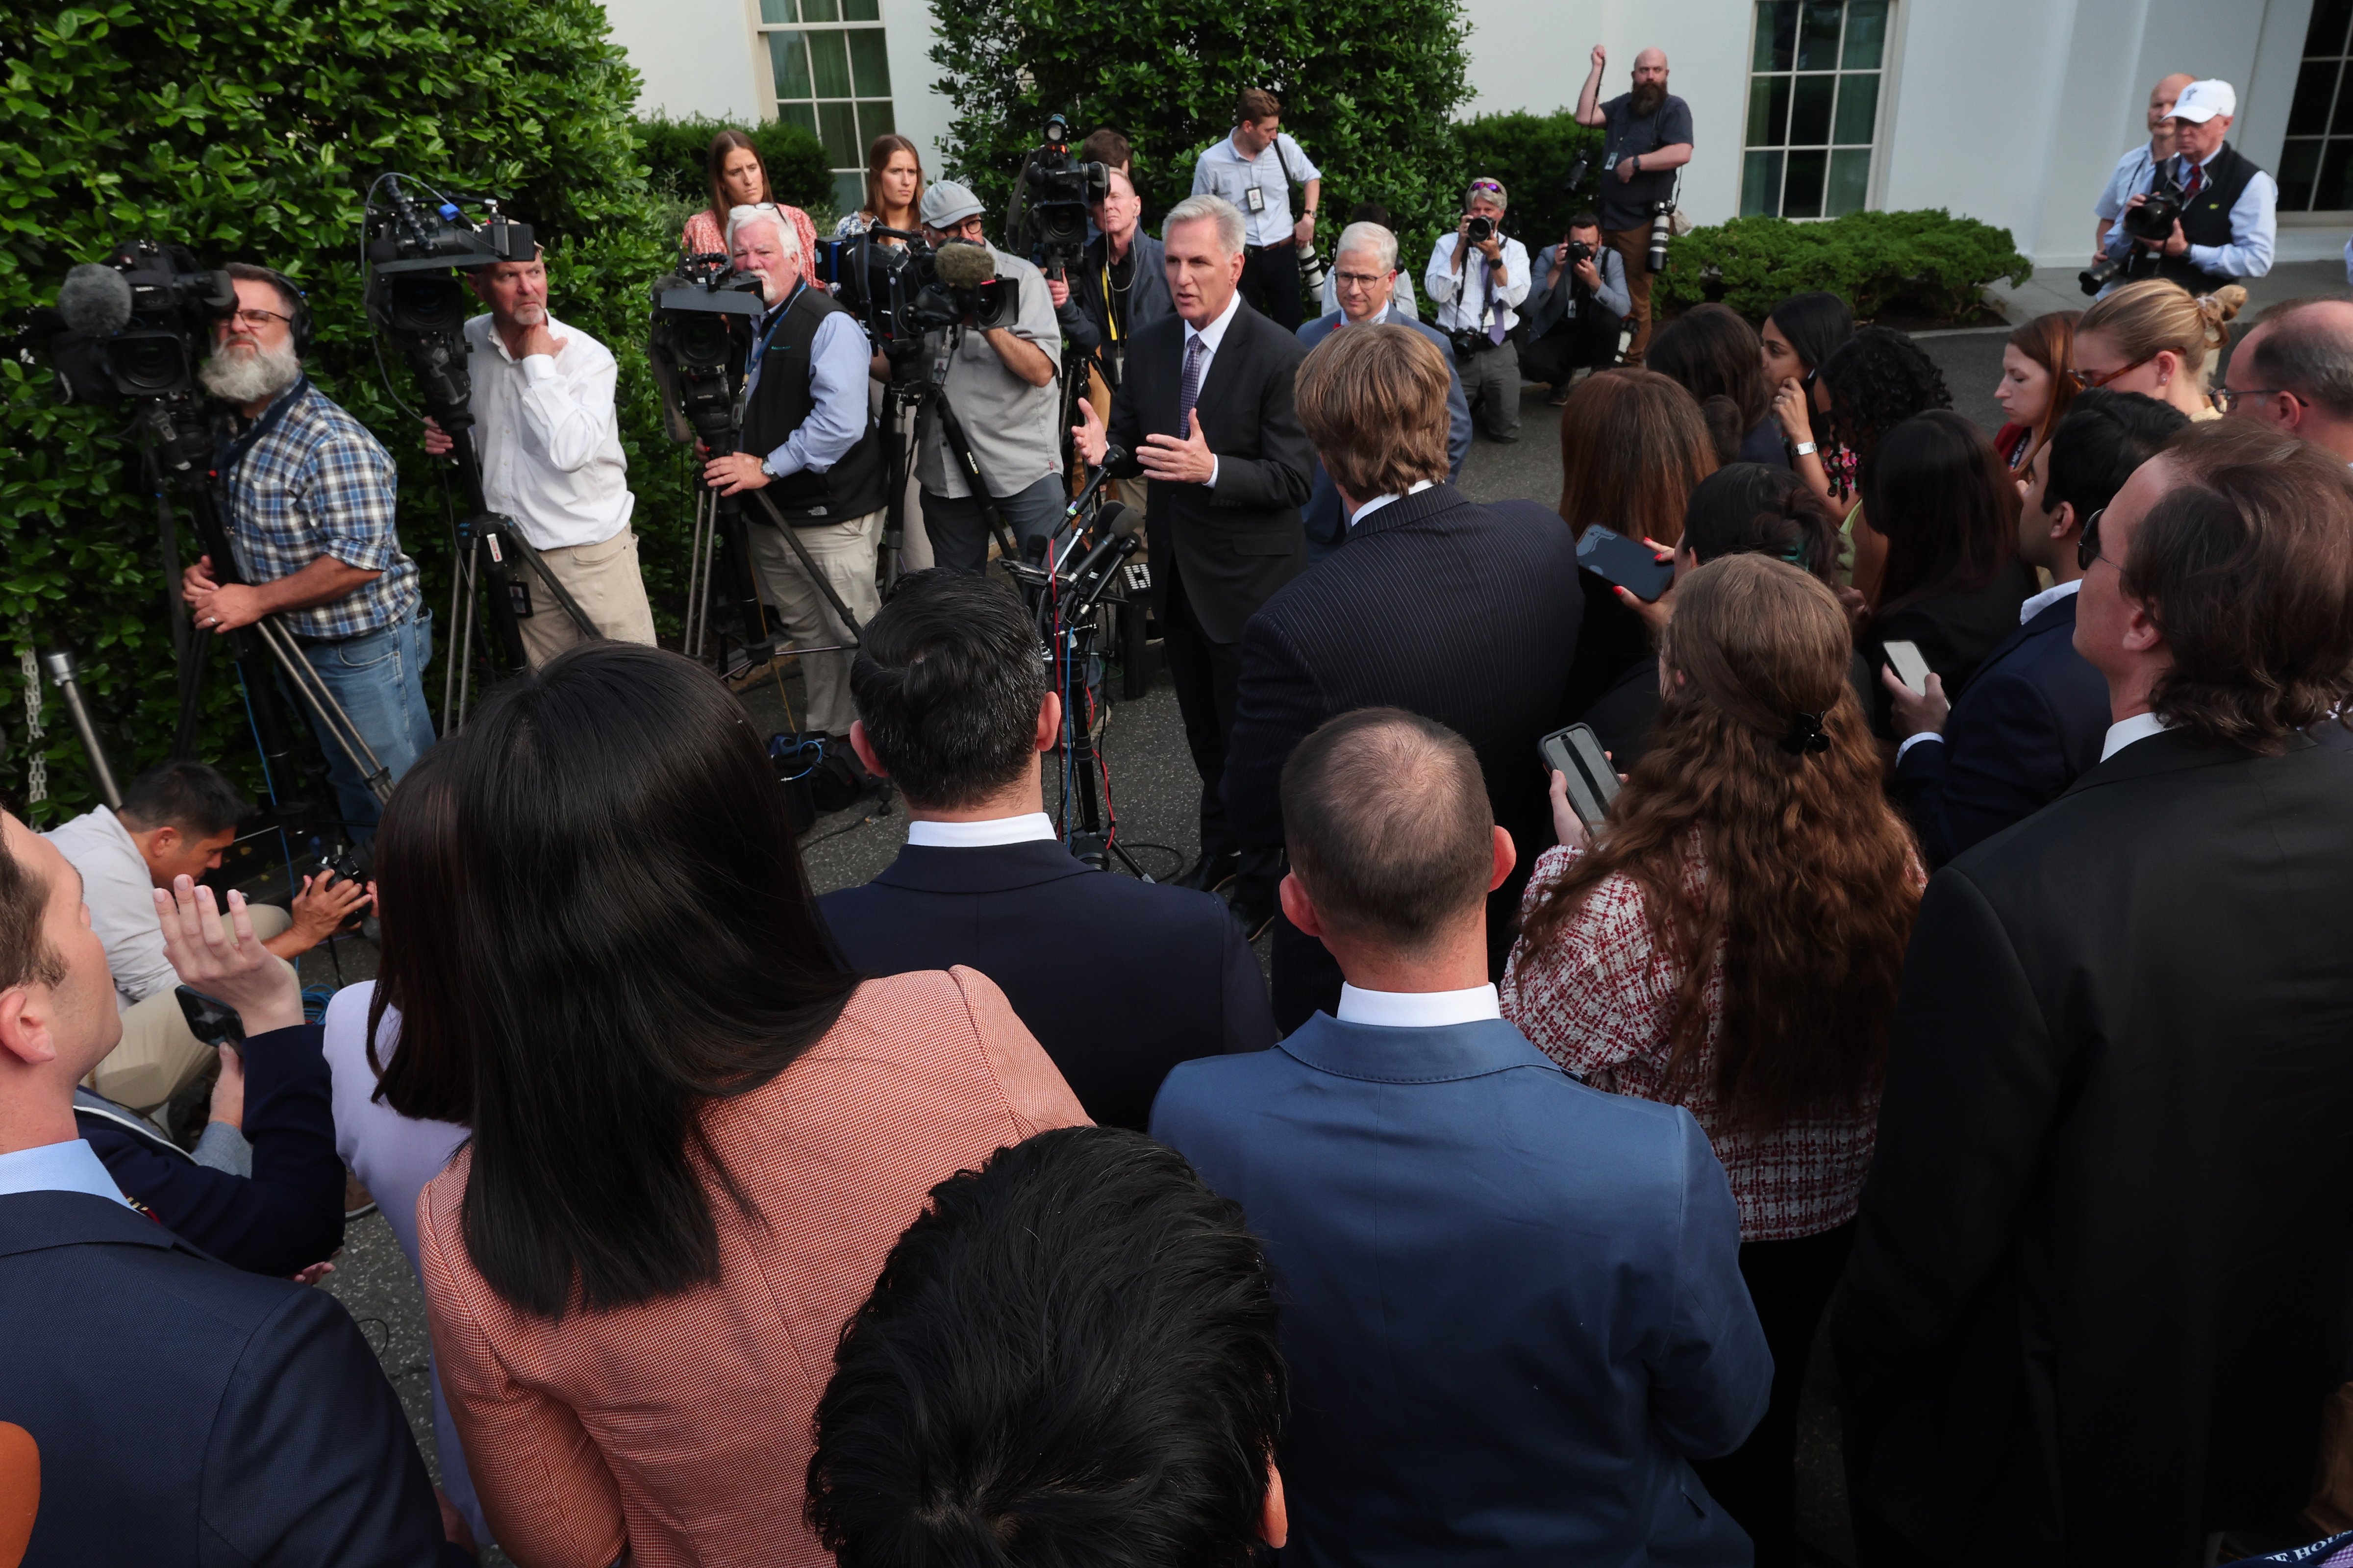 U.S. Speaker of the House Kevin McCarthy (R-CA), joined by Rep. Patrick McHenry (R-NC), speaks to reporters following his meeting with U.S. President Joe Biden at the White House on May 22, 2023. (Alex Wong–Getty Images)